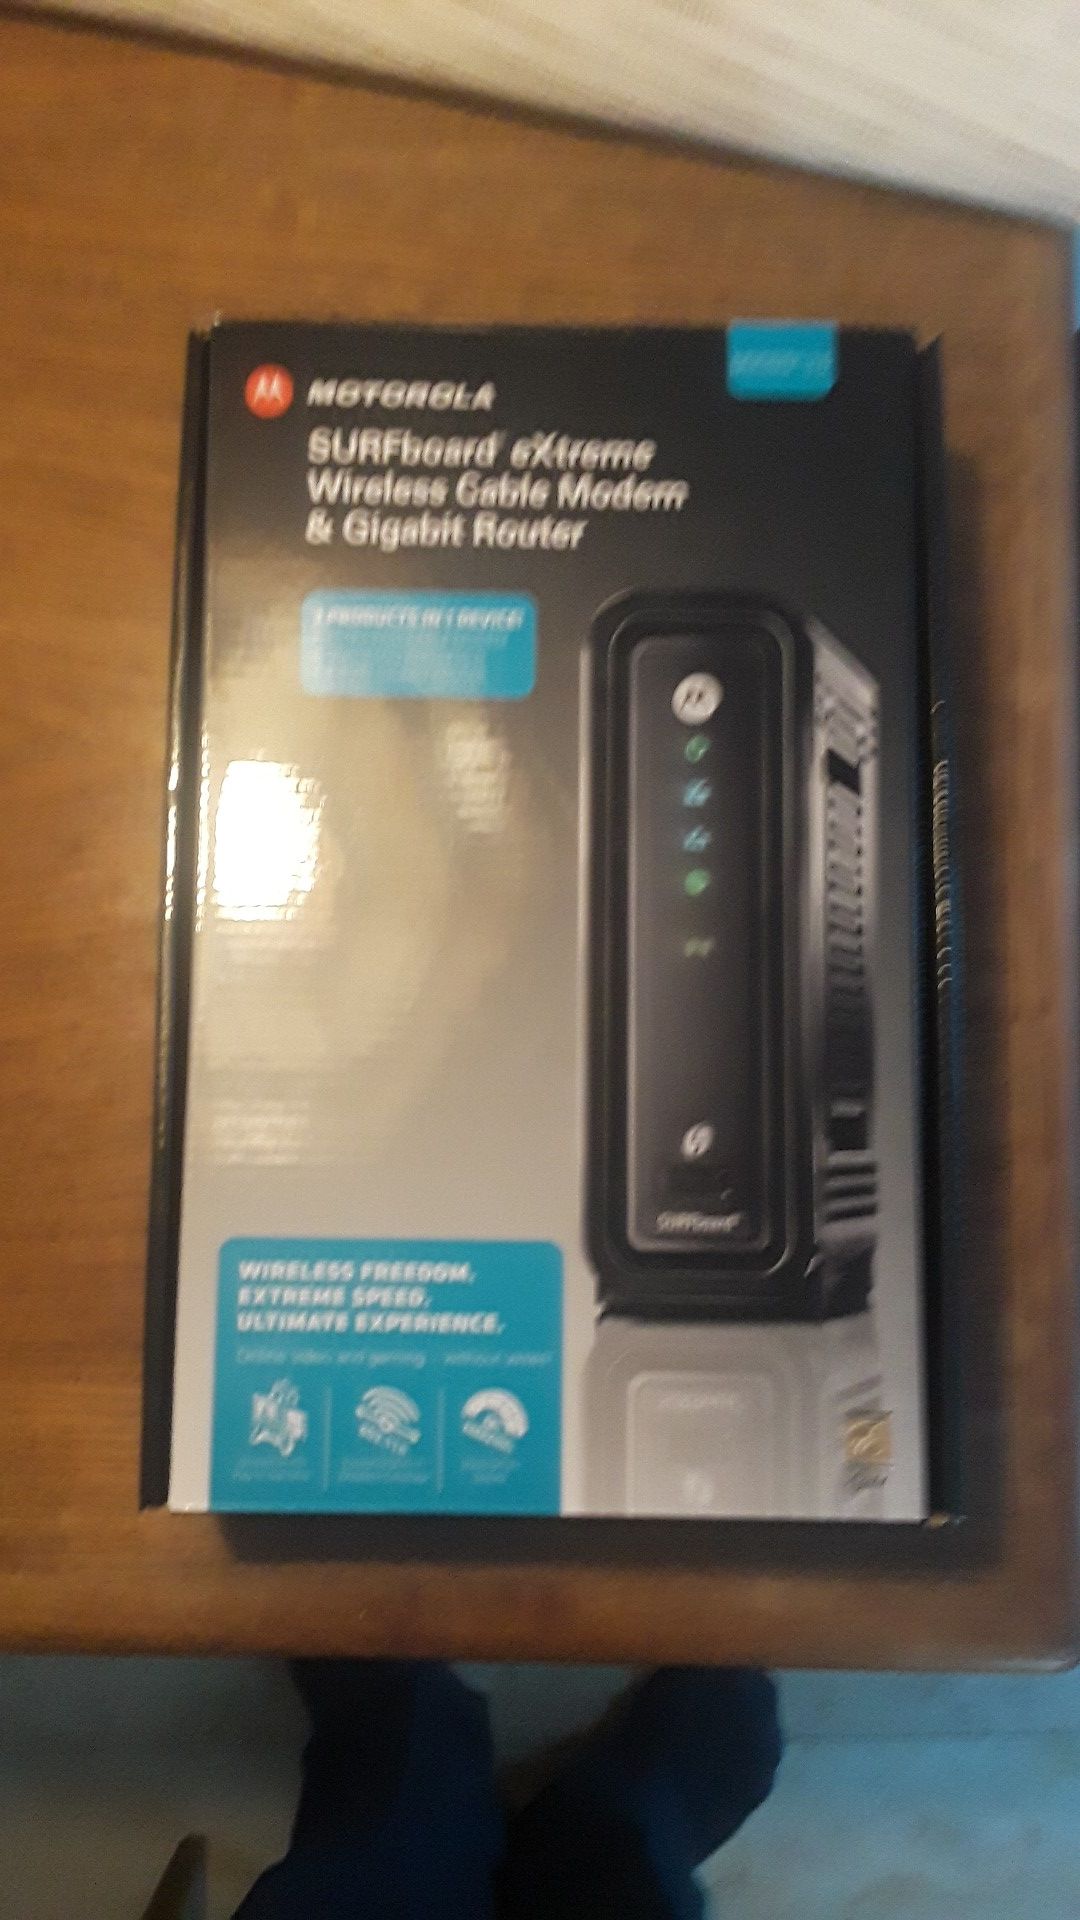 Motorola SURFboard eXtreme SBG6580 Wireless Cable Modem and Gigabit Router